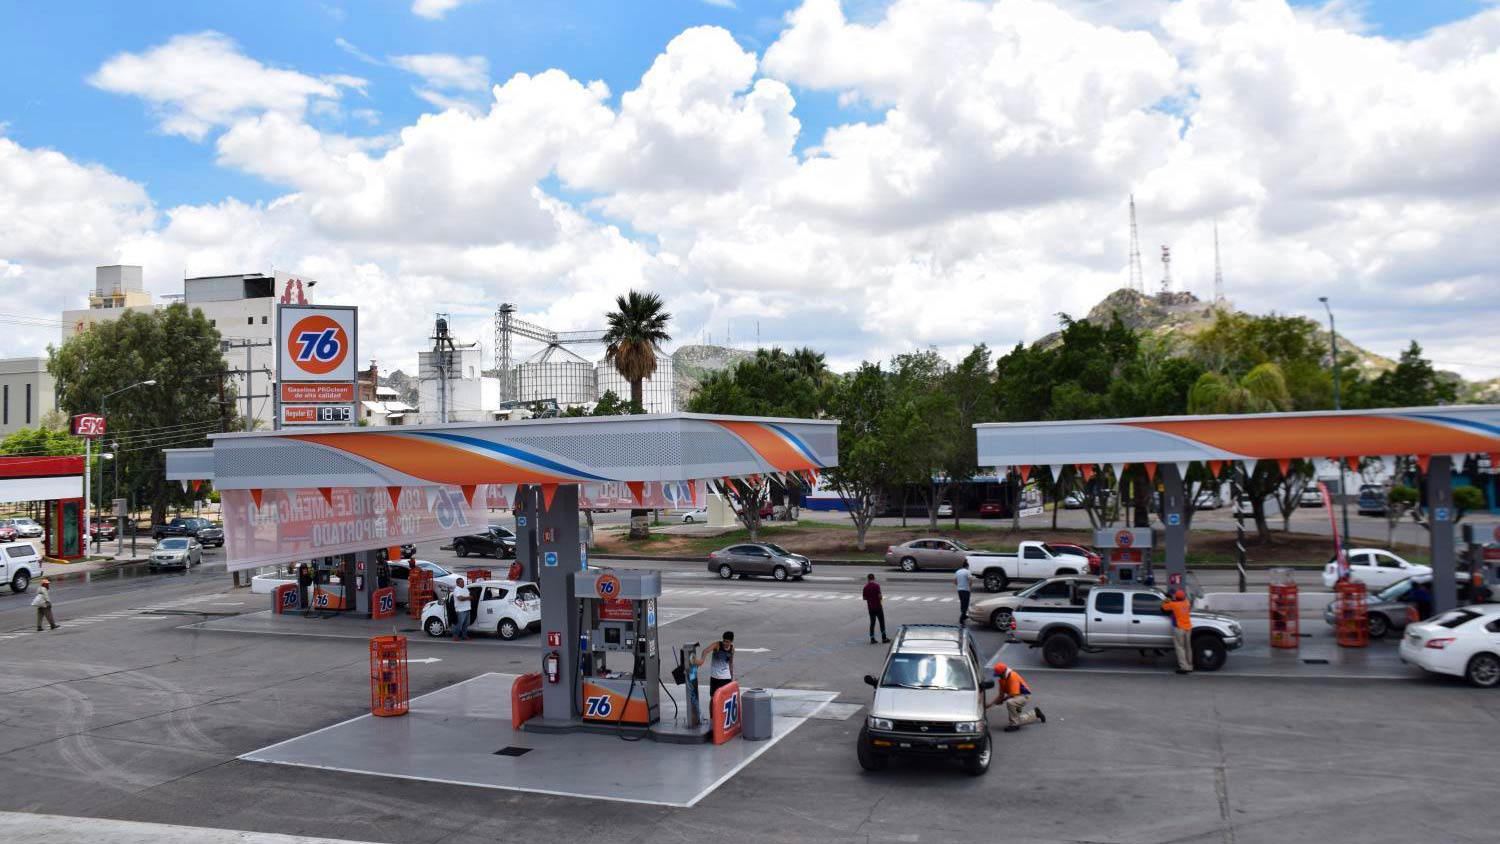 This 76 gas station in Hermosillo, Sonora, is one of three that Texas-based Phillips 66 opened on July 12, marking the company's debut in Mexico.